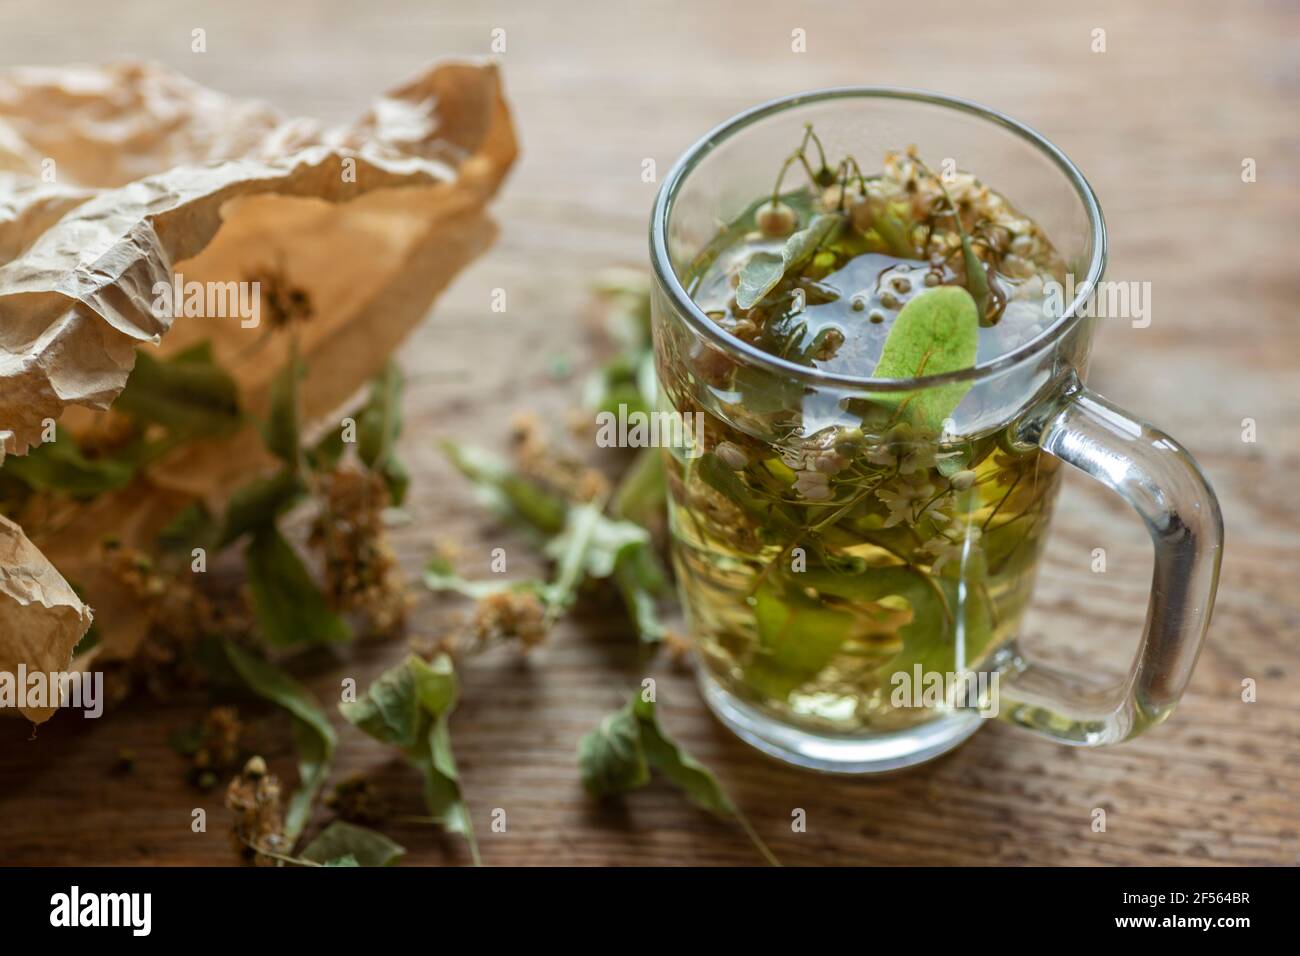 Fresh lime tea by dried linden leaves in paper bag on wooden cutting board Stock Photo